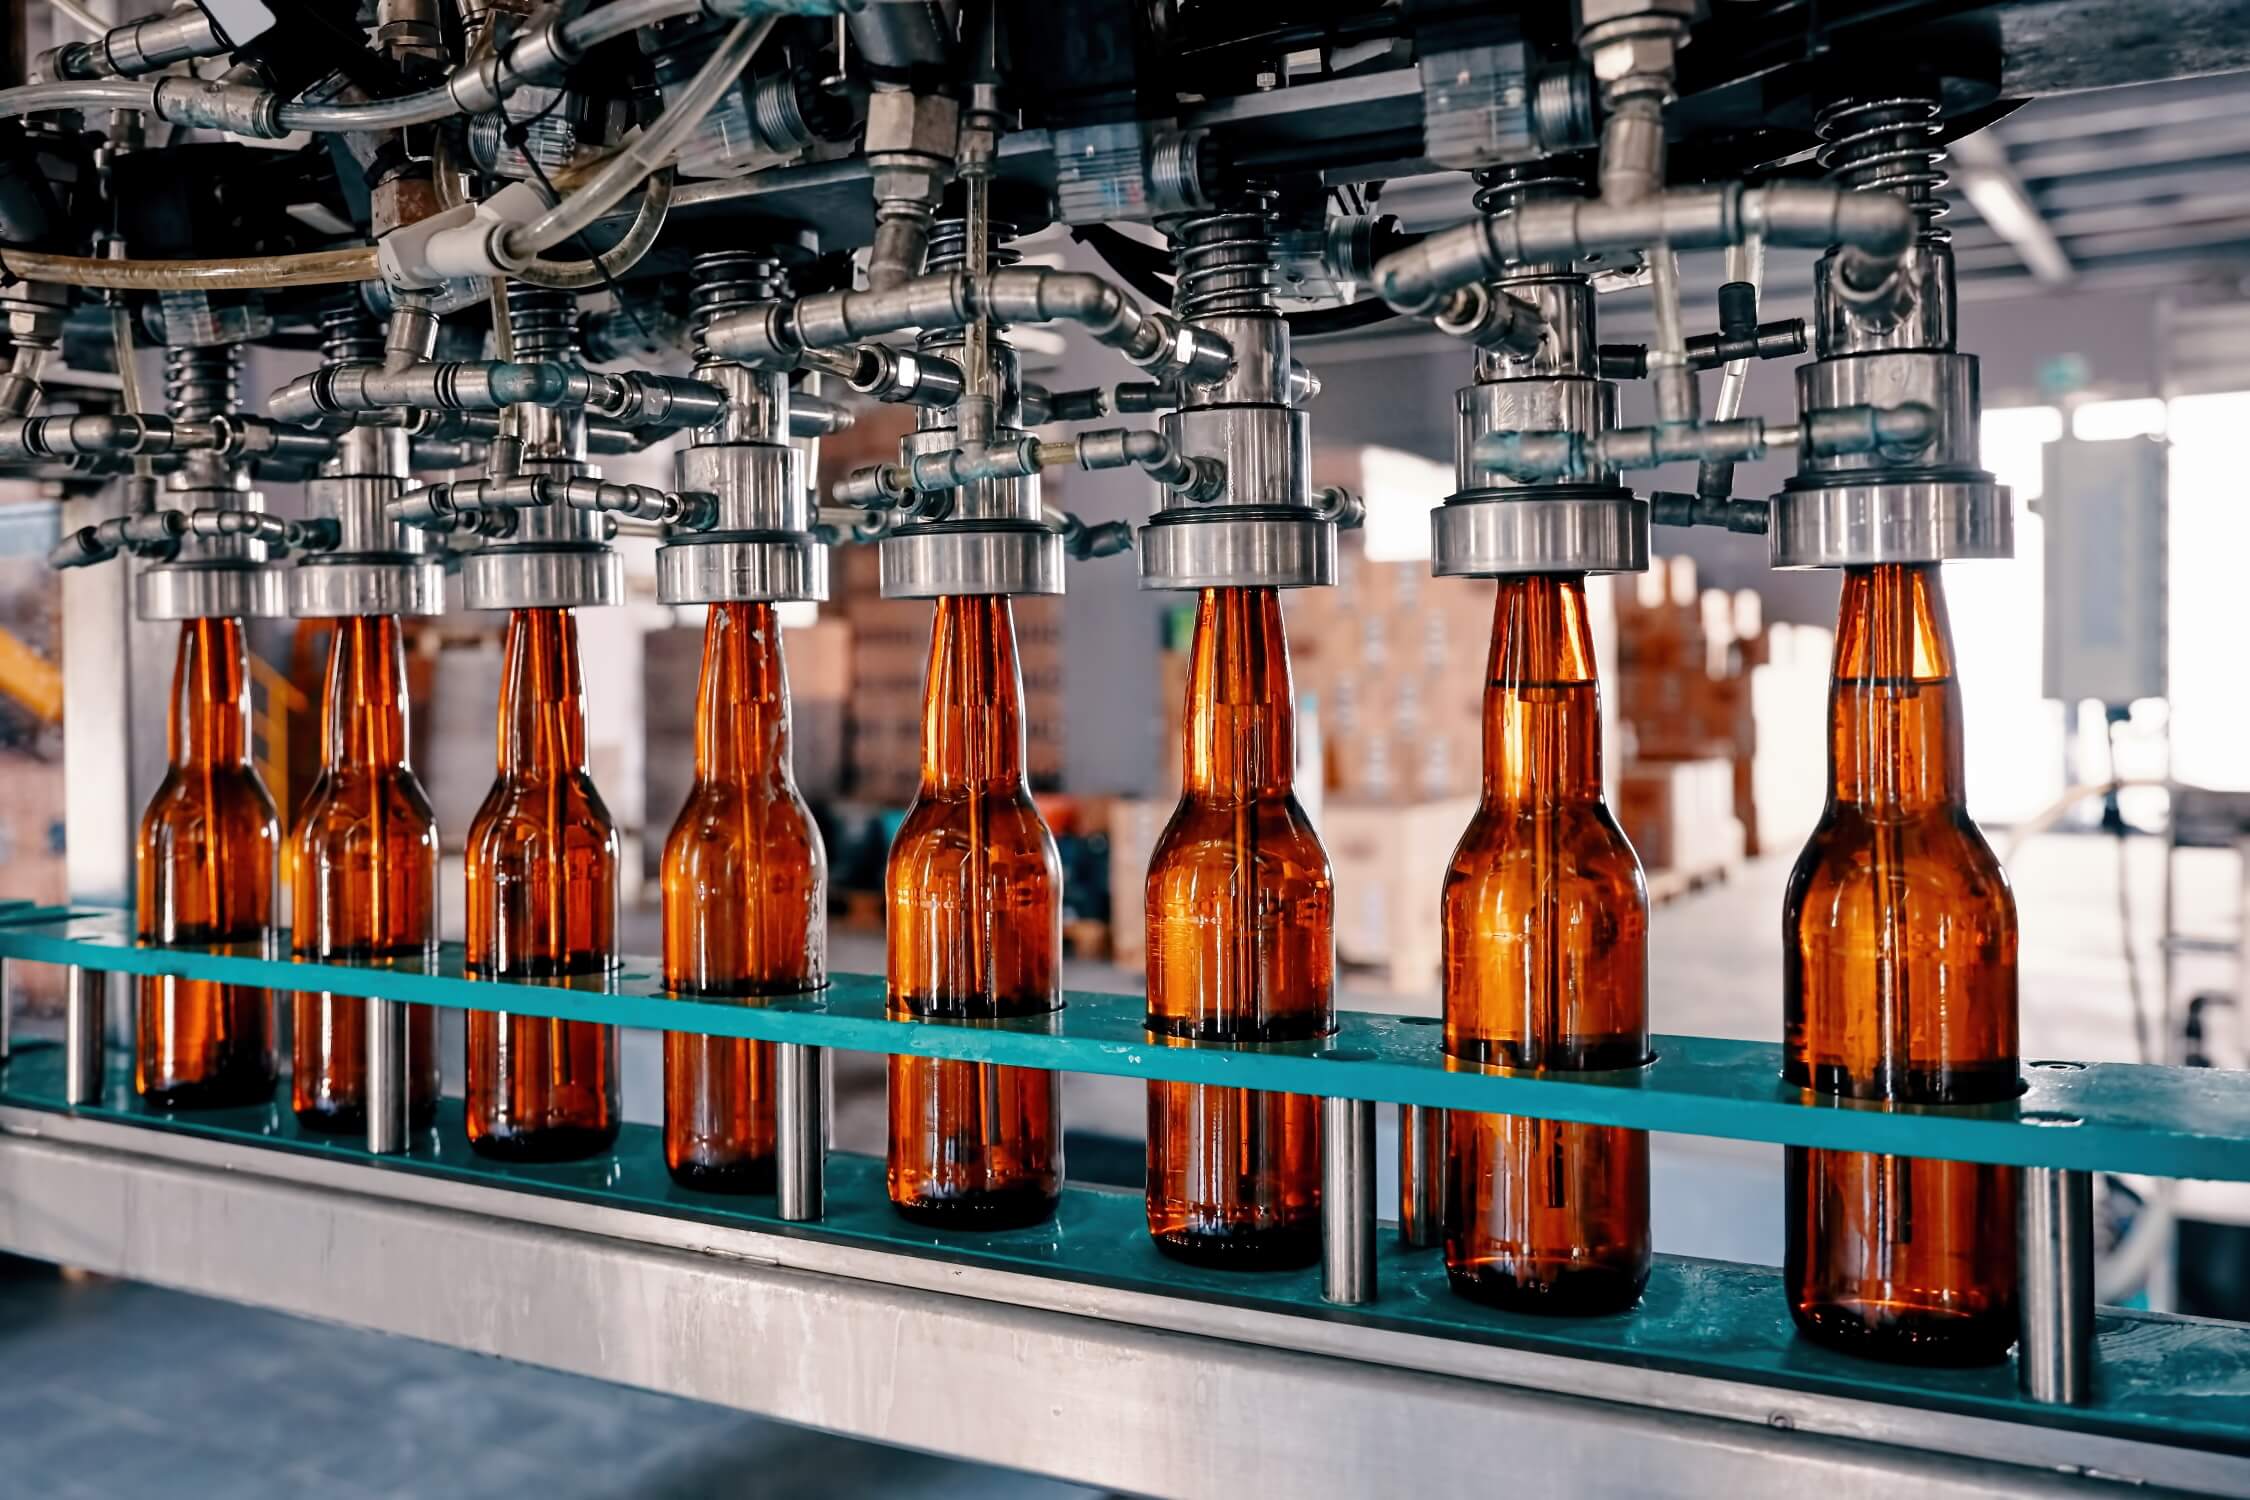 Food and beverage manufacturing faces firece competition